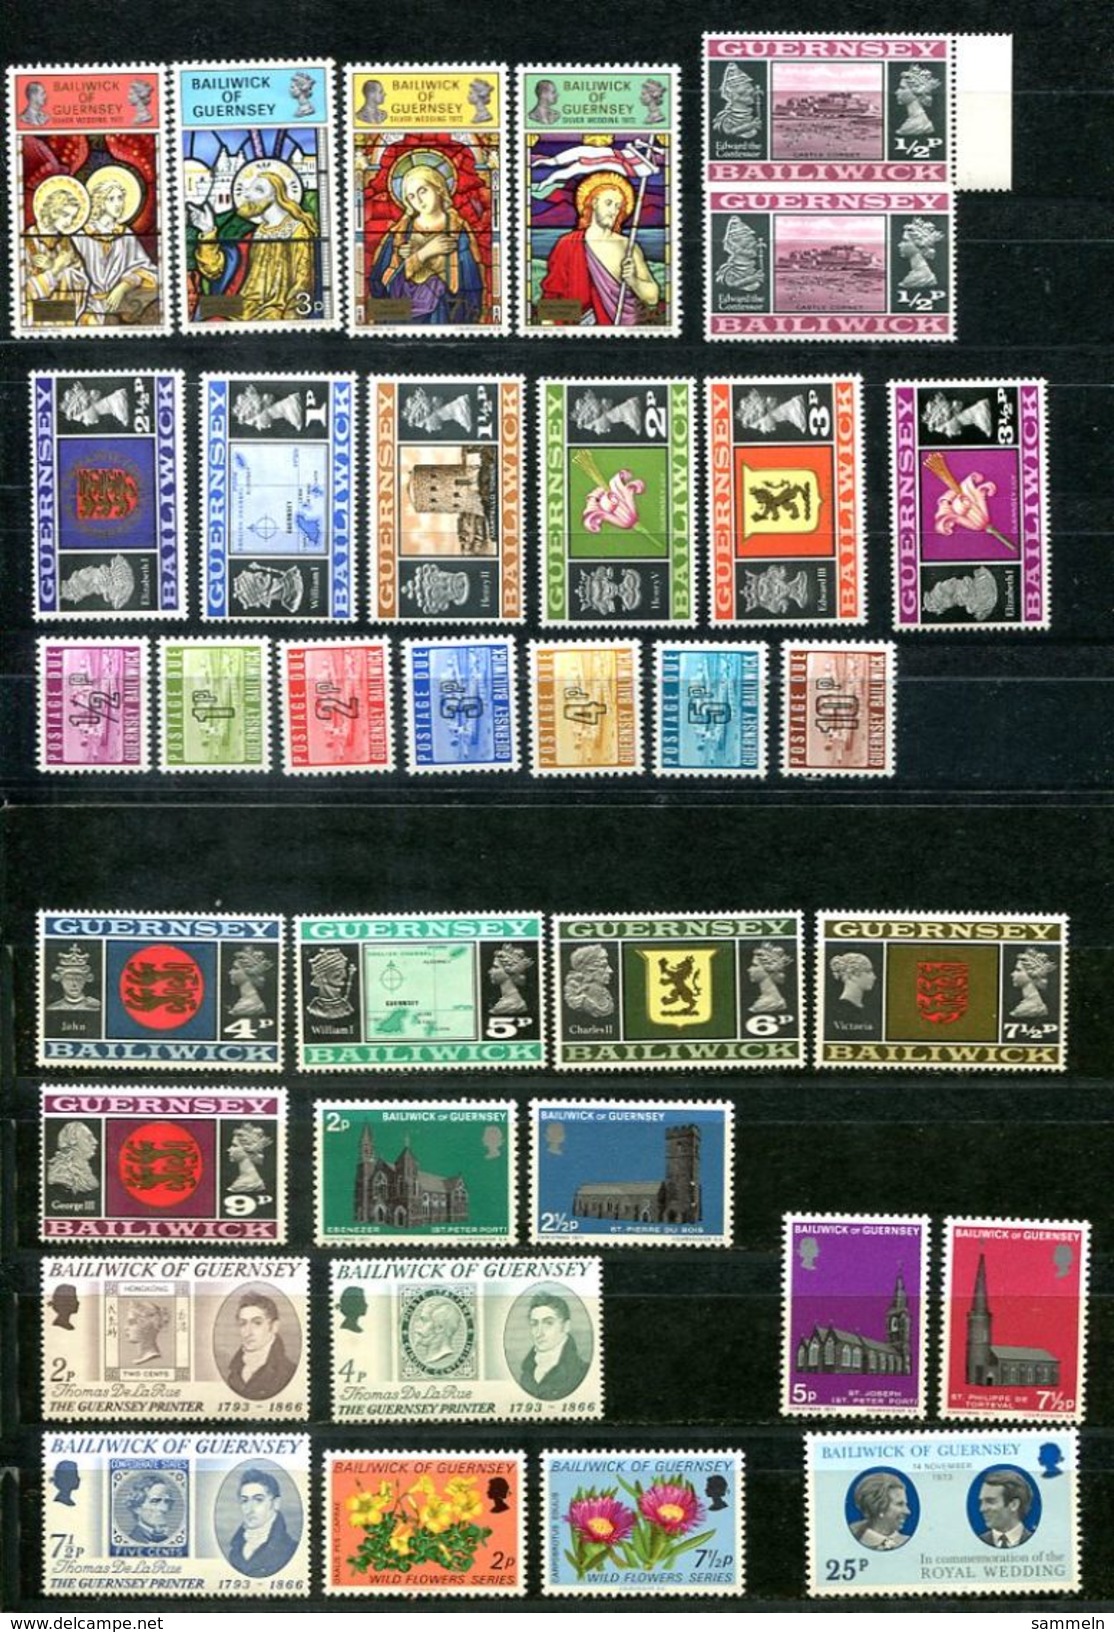 6483 - GUERNSEY - Lot Postfrische Marken - Siehe Scans / Lot Of Mnh Stamps - See Scans - Guernesey